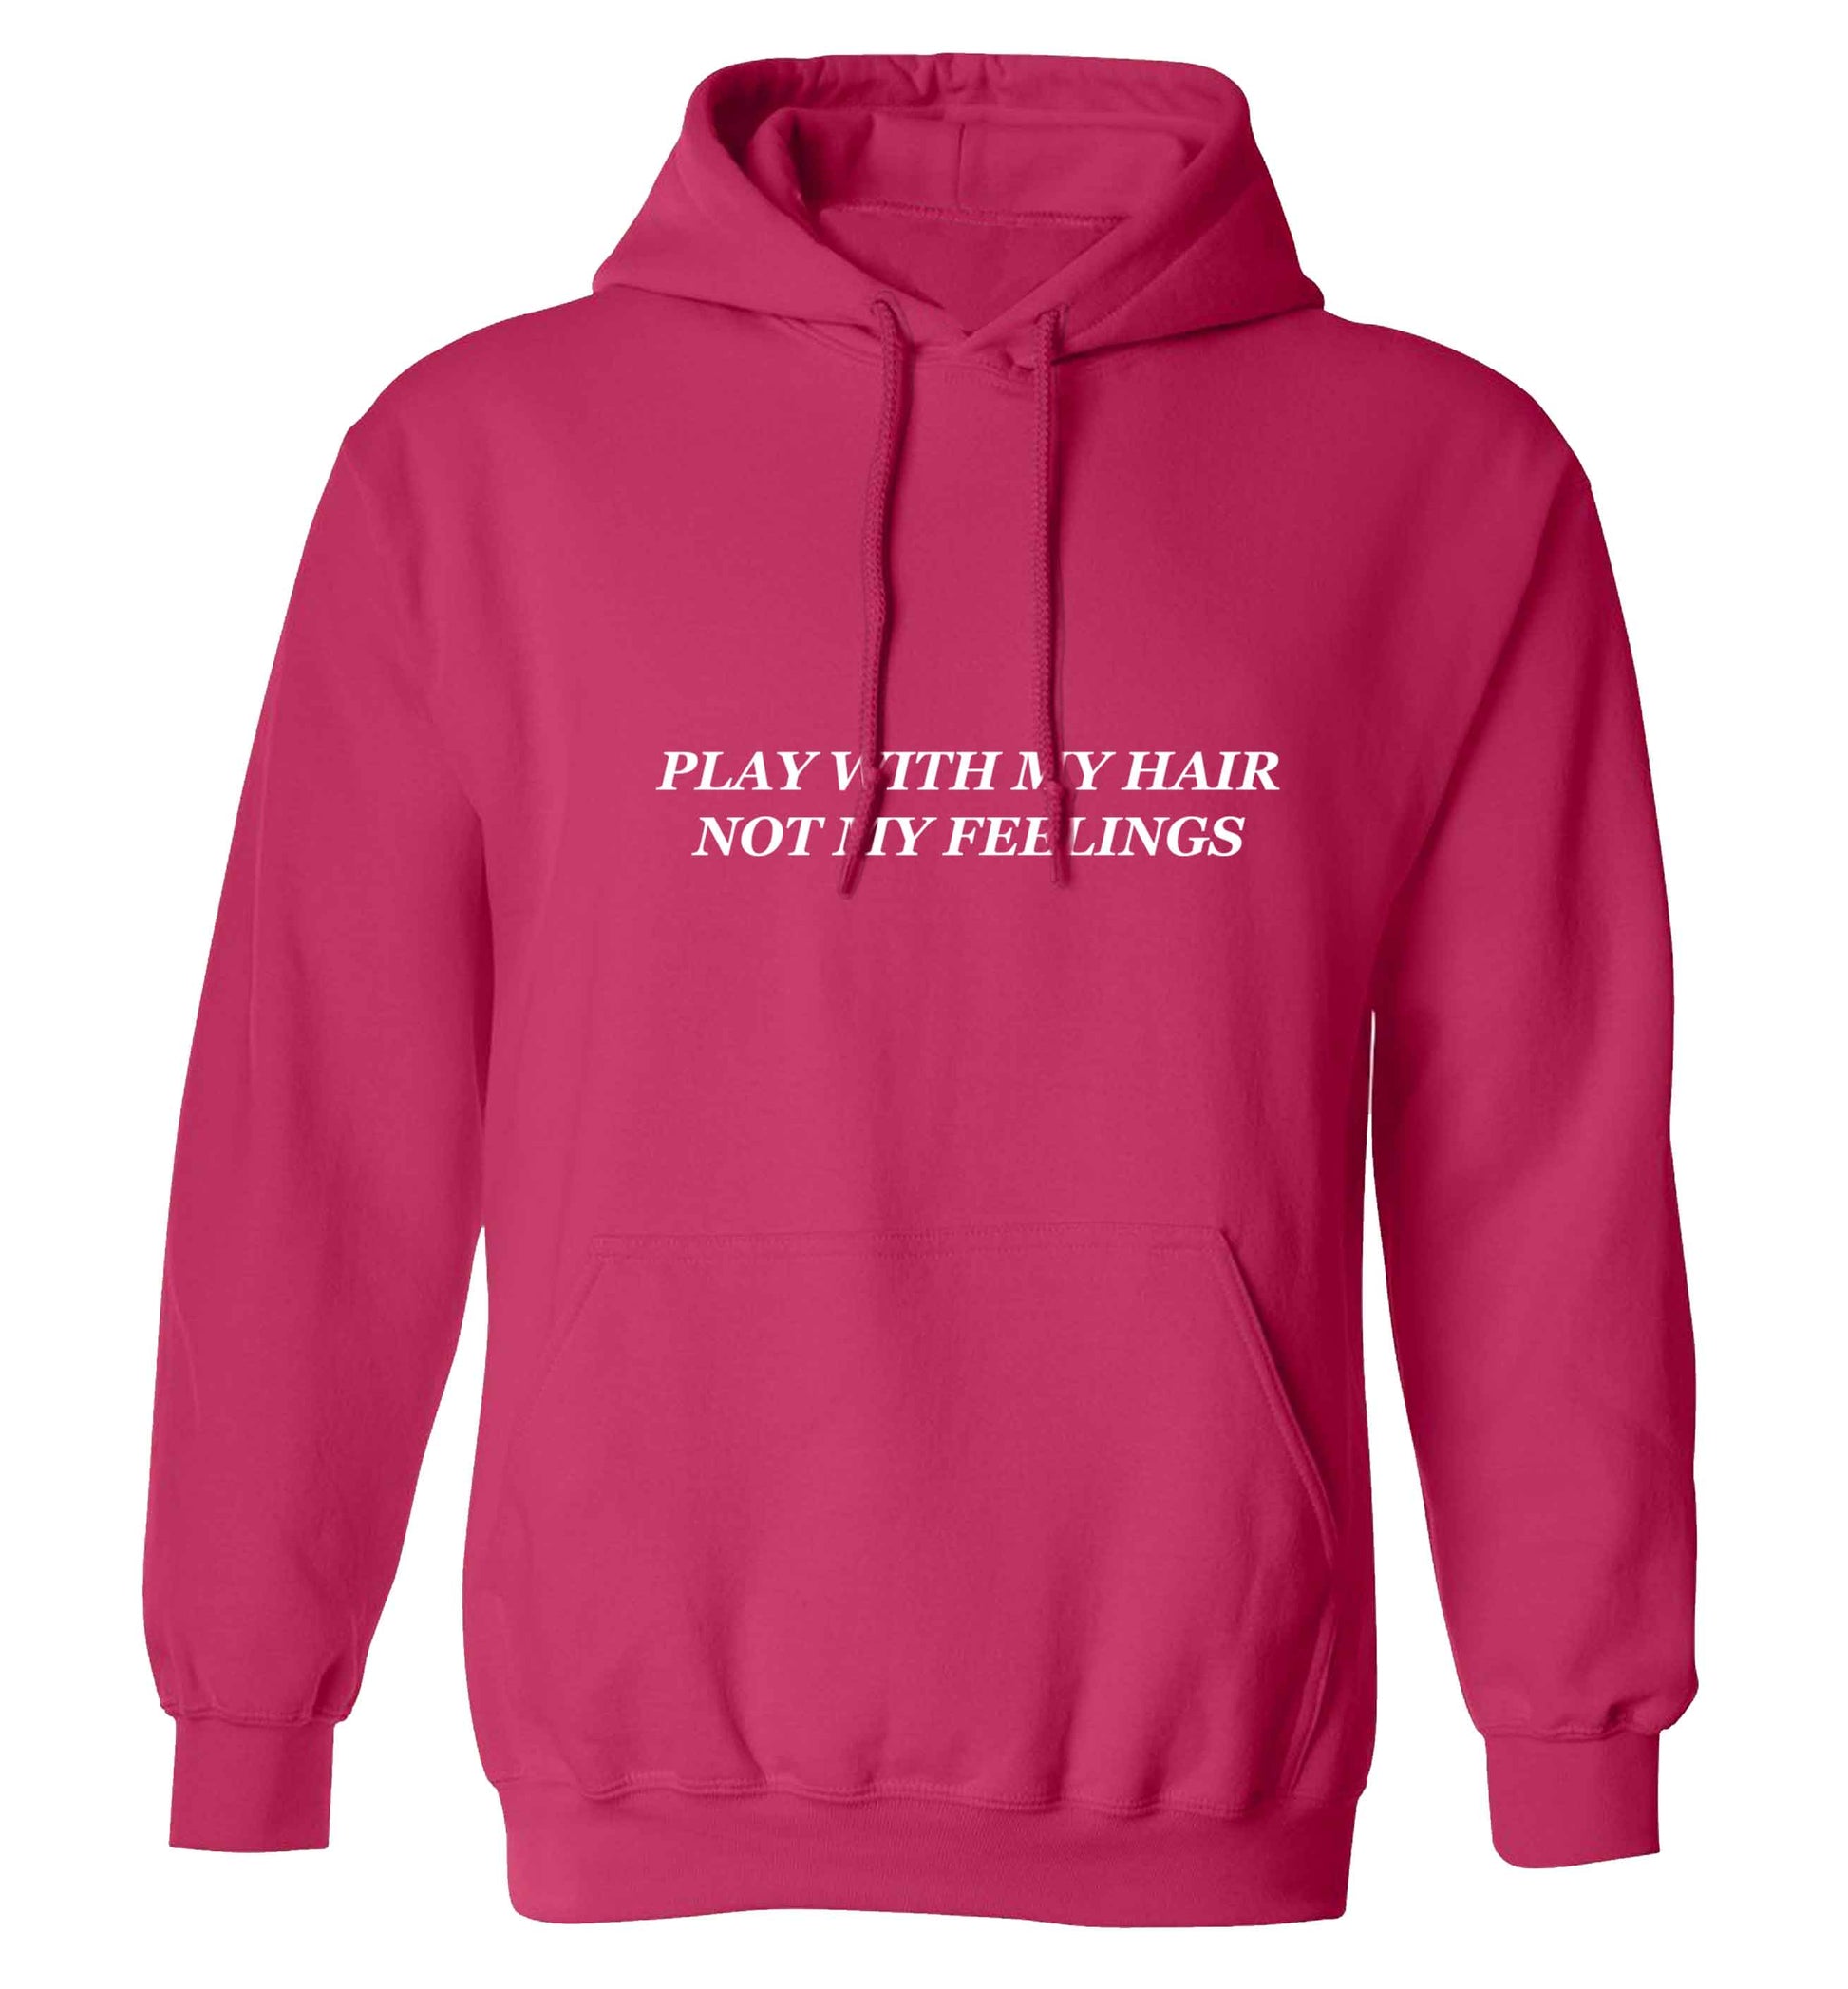 Play with my hair not my feelings adults unisex pink hoodie 2XL